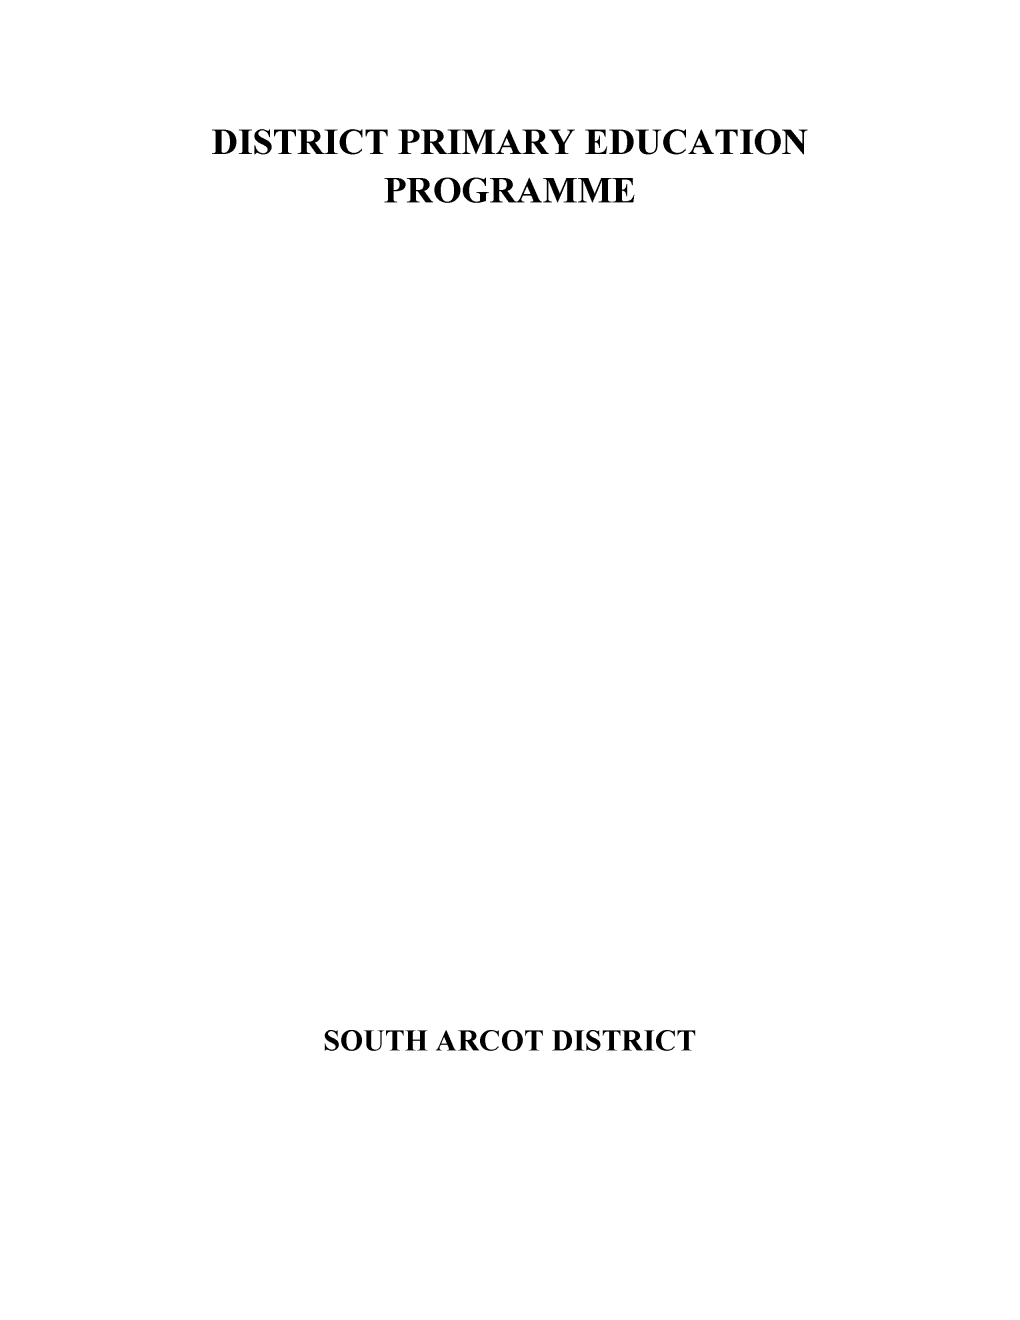 South Arcot District District Primary Education Programme